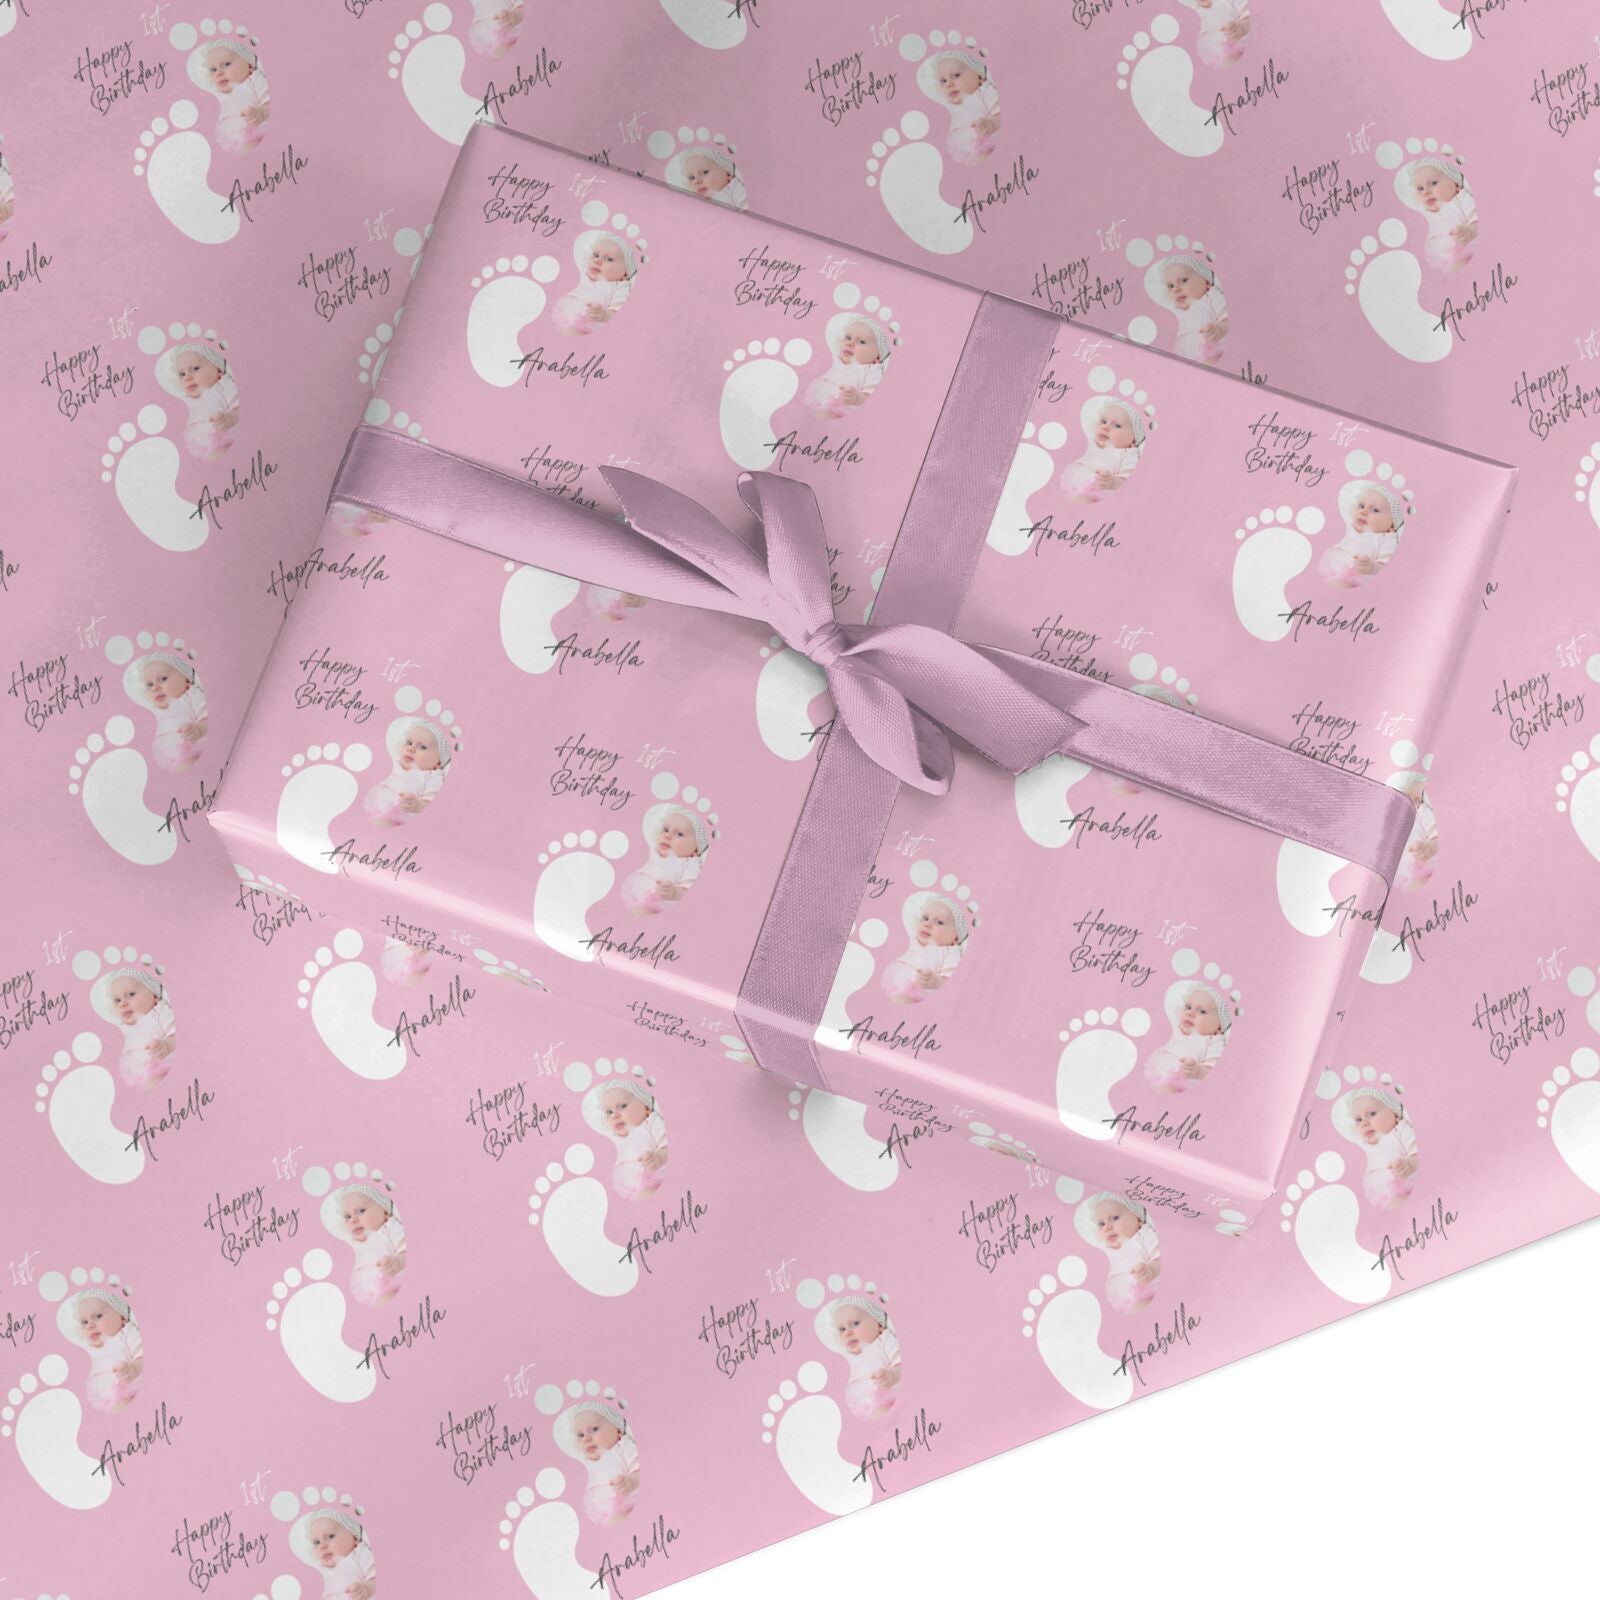 Personalised Kids Birthday Wrapping Paper – Dyefor